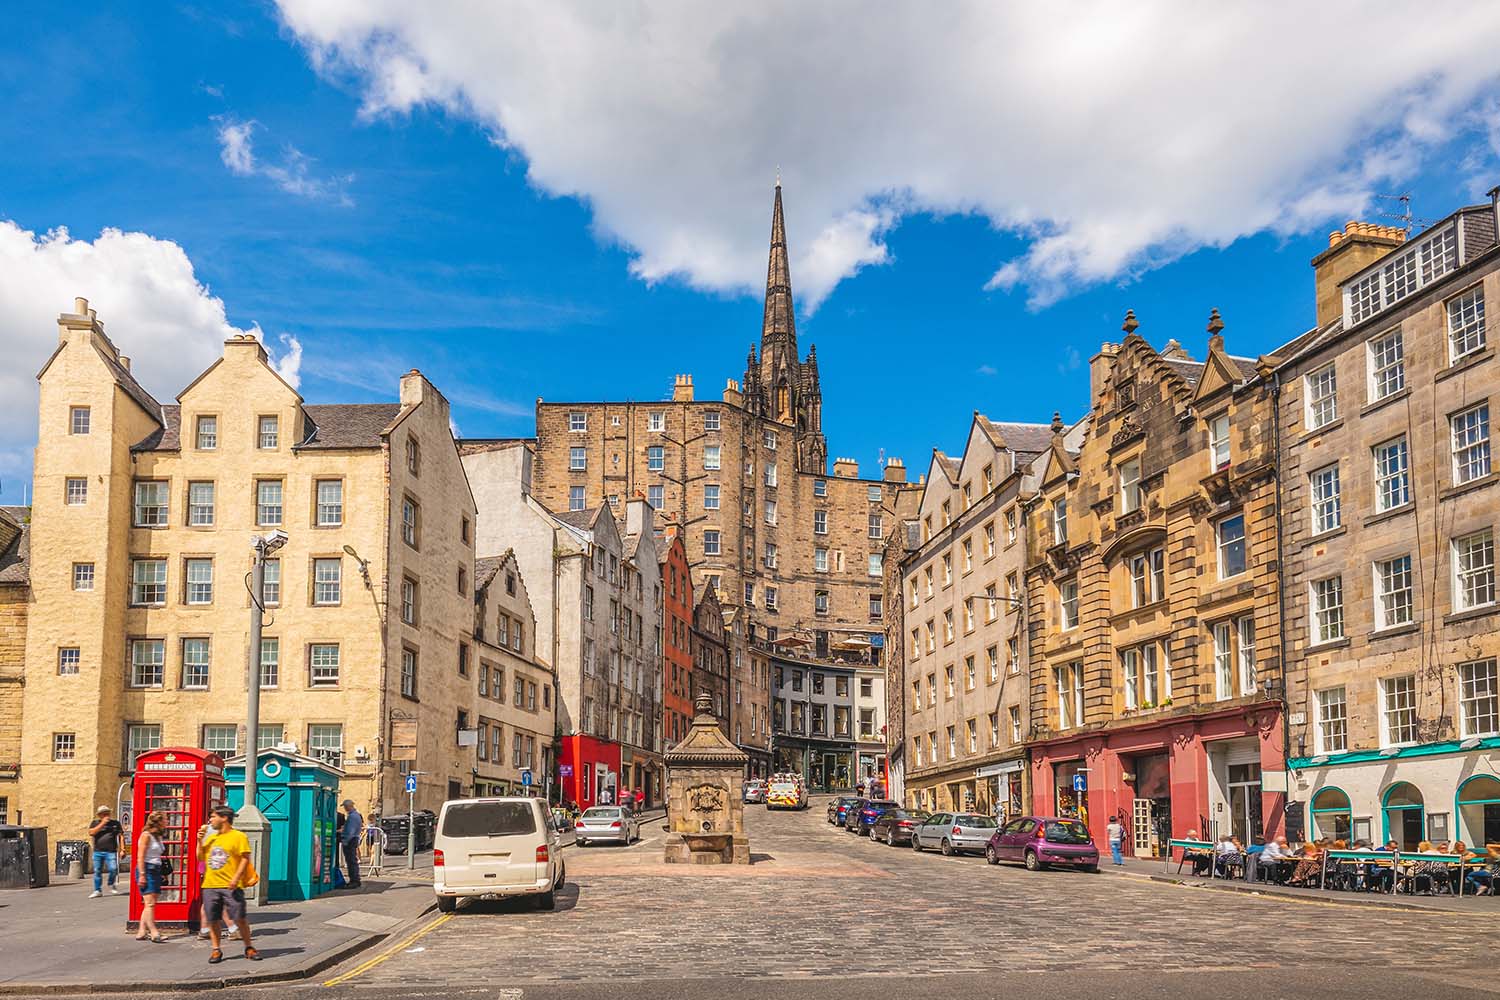 The Grassmarket area in Edinburgh looking up towards the cobbled hill of Victoria Street